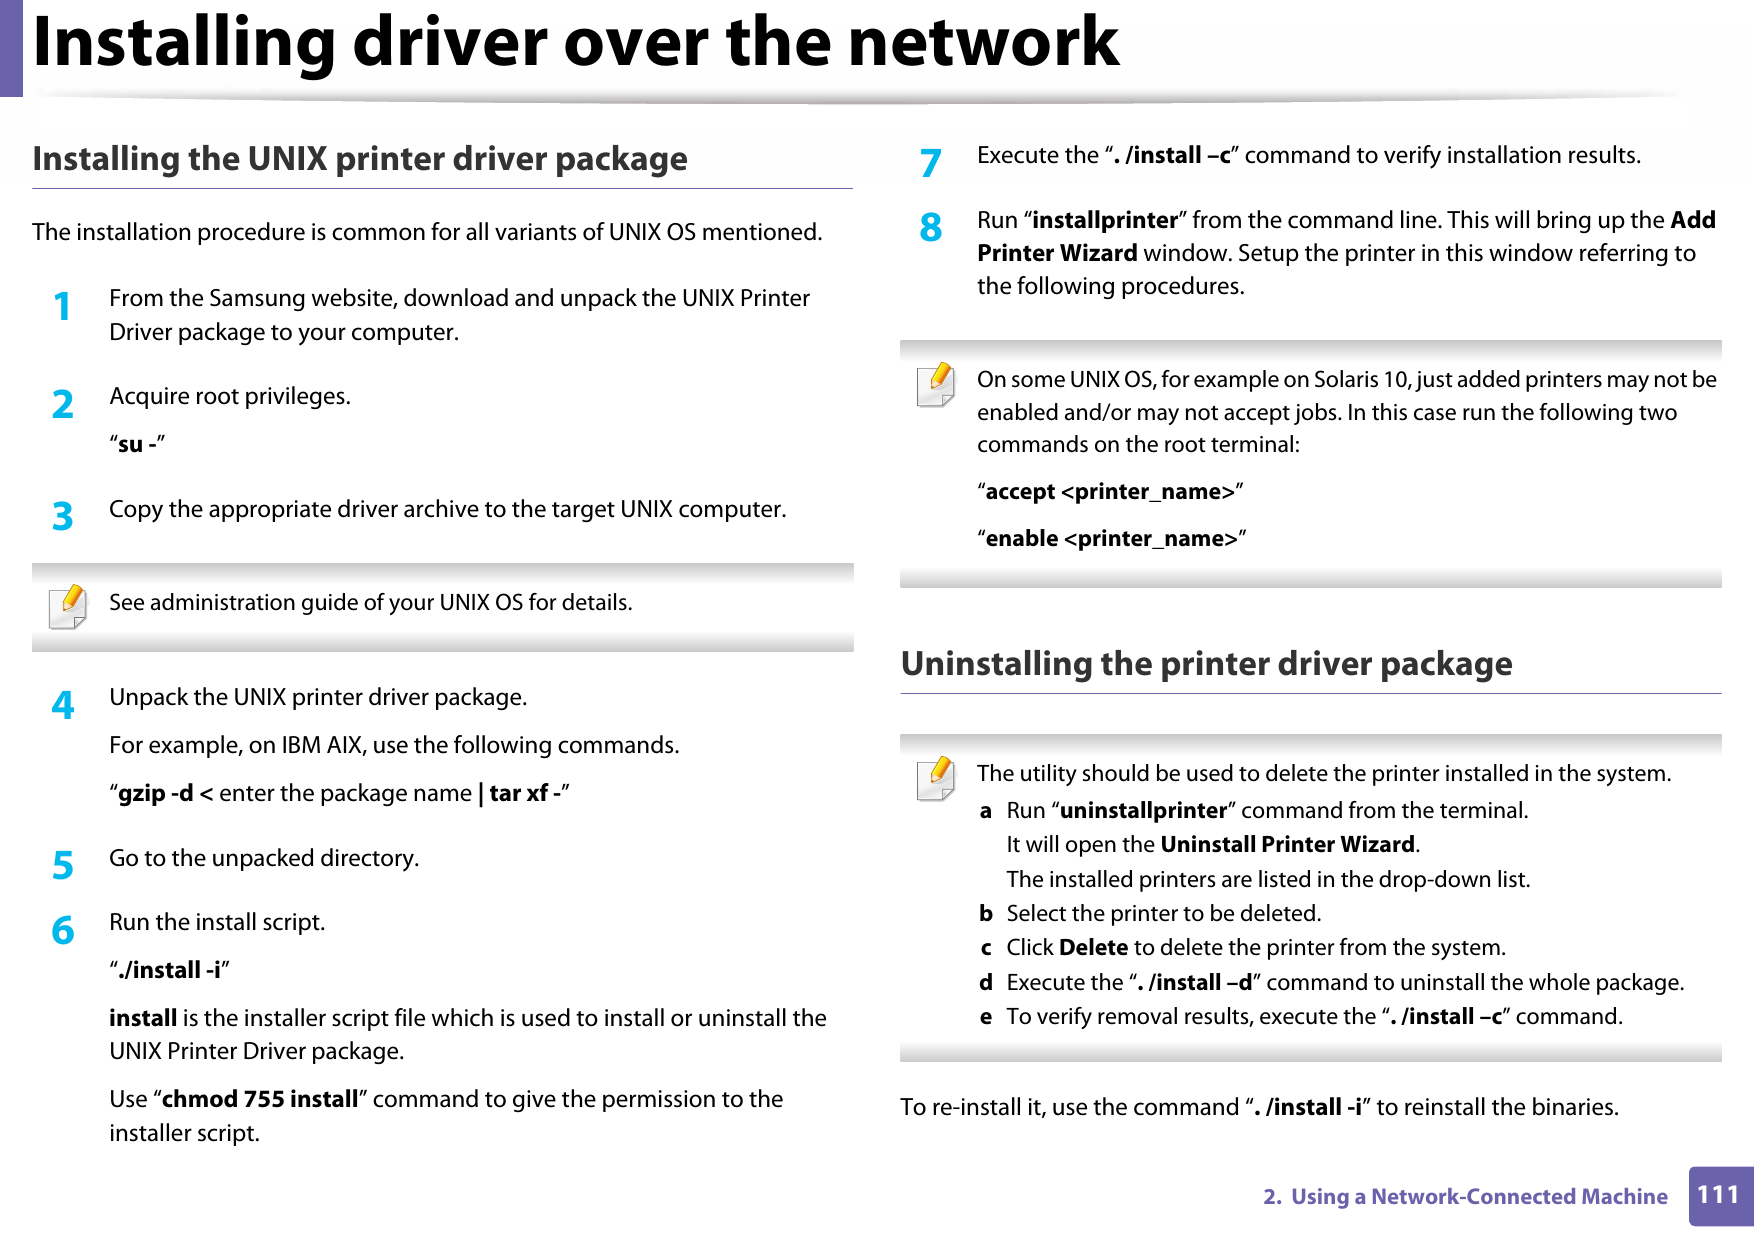 Installing driver over the network1112.  Using a Network-Connected MachineInstalling the UNIX printer driver packageThe installation procedure is common for all variants of UNIX OS mentioned.1From the Samsung website, download and unpack the UNIX Printer Driver package to your computer. 2  Acquire root privileges.“su -”3  Copy the appropriate driver archive to the target UNIX computer. See administration guide of your UNIX OS for details. 4  Unpack the UNIX printer driver package.For example, on IBM AIX, use the following commands.“gzip -d &lt; enter the package name | tar xf -”5  Go to the unpacked directory.6  Run the install script.“./install -i”install is the installer script file which is used to install or uninstall the UNIX Printer Driver package.Use “chmod 755 install” command to give the permission to the installer script.7  Execute the “. /install –c” command to verify installation results.8  Run “installprinter” from the command line. This will bring up the Add Printer Wizard window. Setup the printer in this window referring to the following procedures. On some UNIX OS, for example on Solaris 10, just added printers may not be enabled and/or may not accept jobs. In this case run the following two commands on the root terminal:“accept &lt;printer_name&gt;”“enable &lt;printer_name&gt;” Uninstalling the printer driver package The utility should be used to delete the printer installed in the system.a  Run “uninstallprinter” command from the terminal.It will open the Uninstall Printer Wizard.The installed printers are listed in the drop-down list.b  Select the printer to be deleted.c  Click Delete to delete the printer from the system.d  Execute the “. /install –d” command to uninstall the whole package.e  To verify removal results, execute the “. /install –c” command. To re-install it, use the command “. /install -i” to reinstall the binaries.